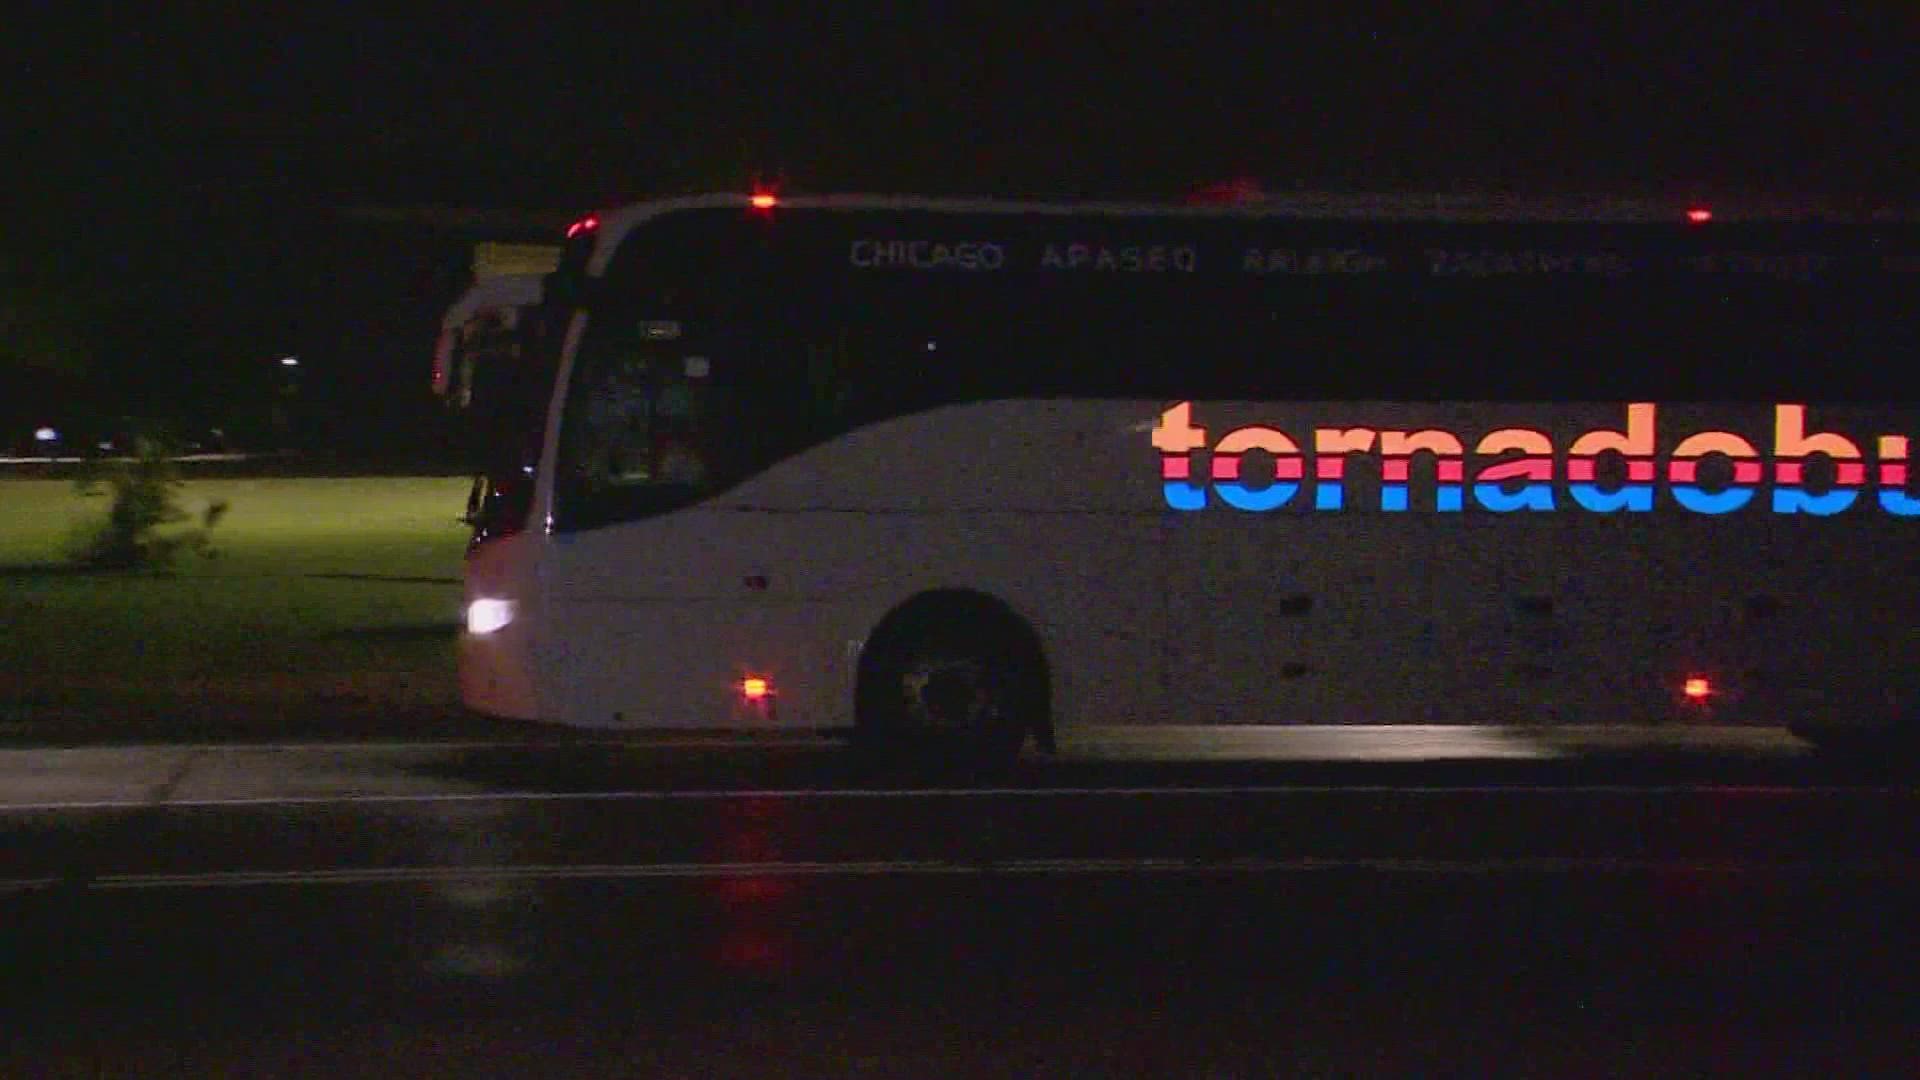 The League of United Latin American Citizens, or LULAC, brought six migrants from the border to Dallas overnight Monday.